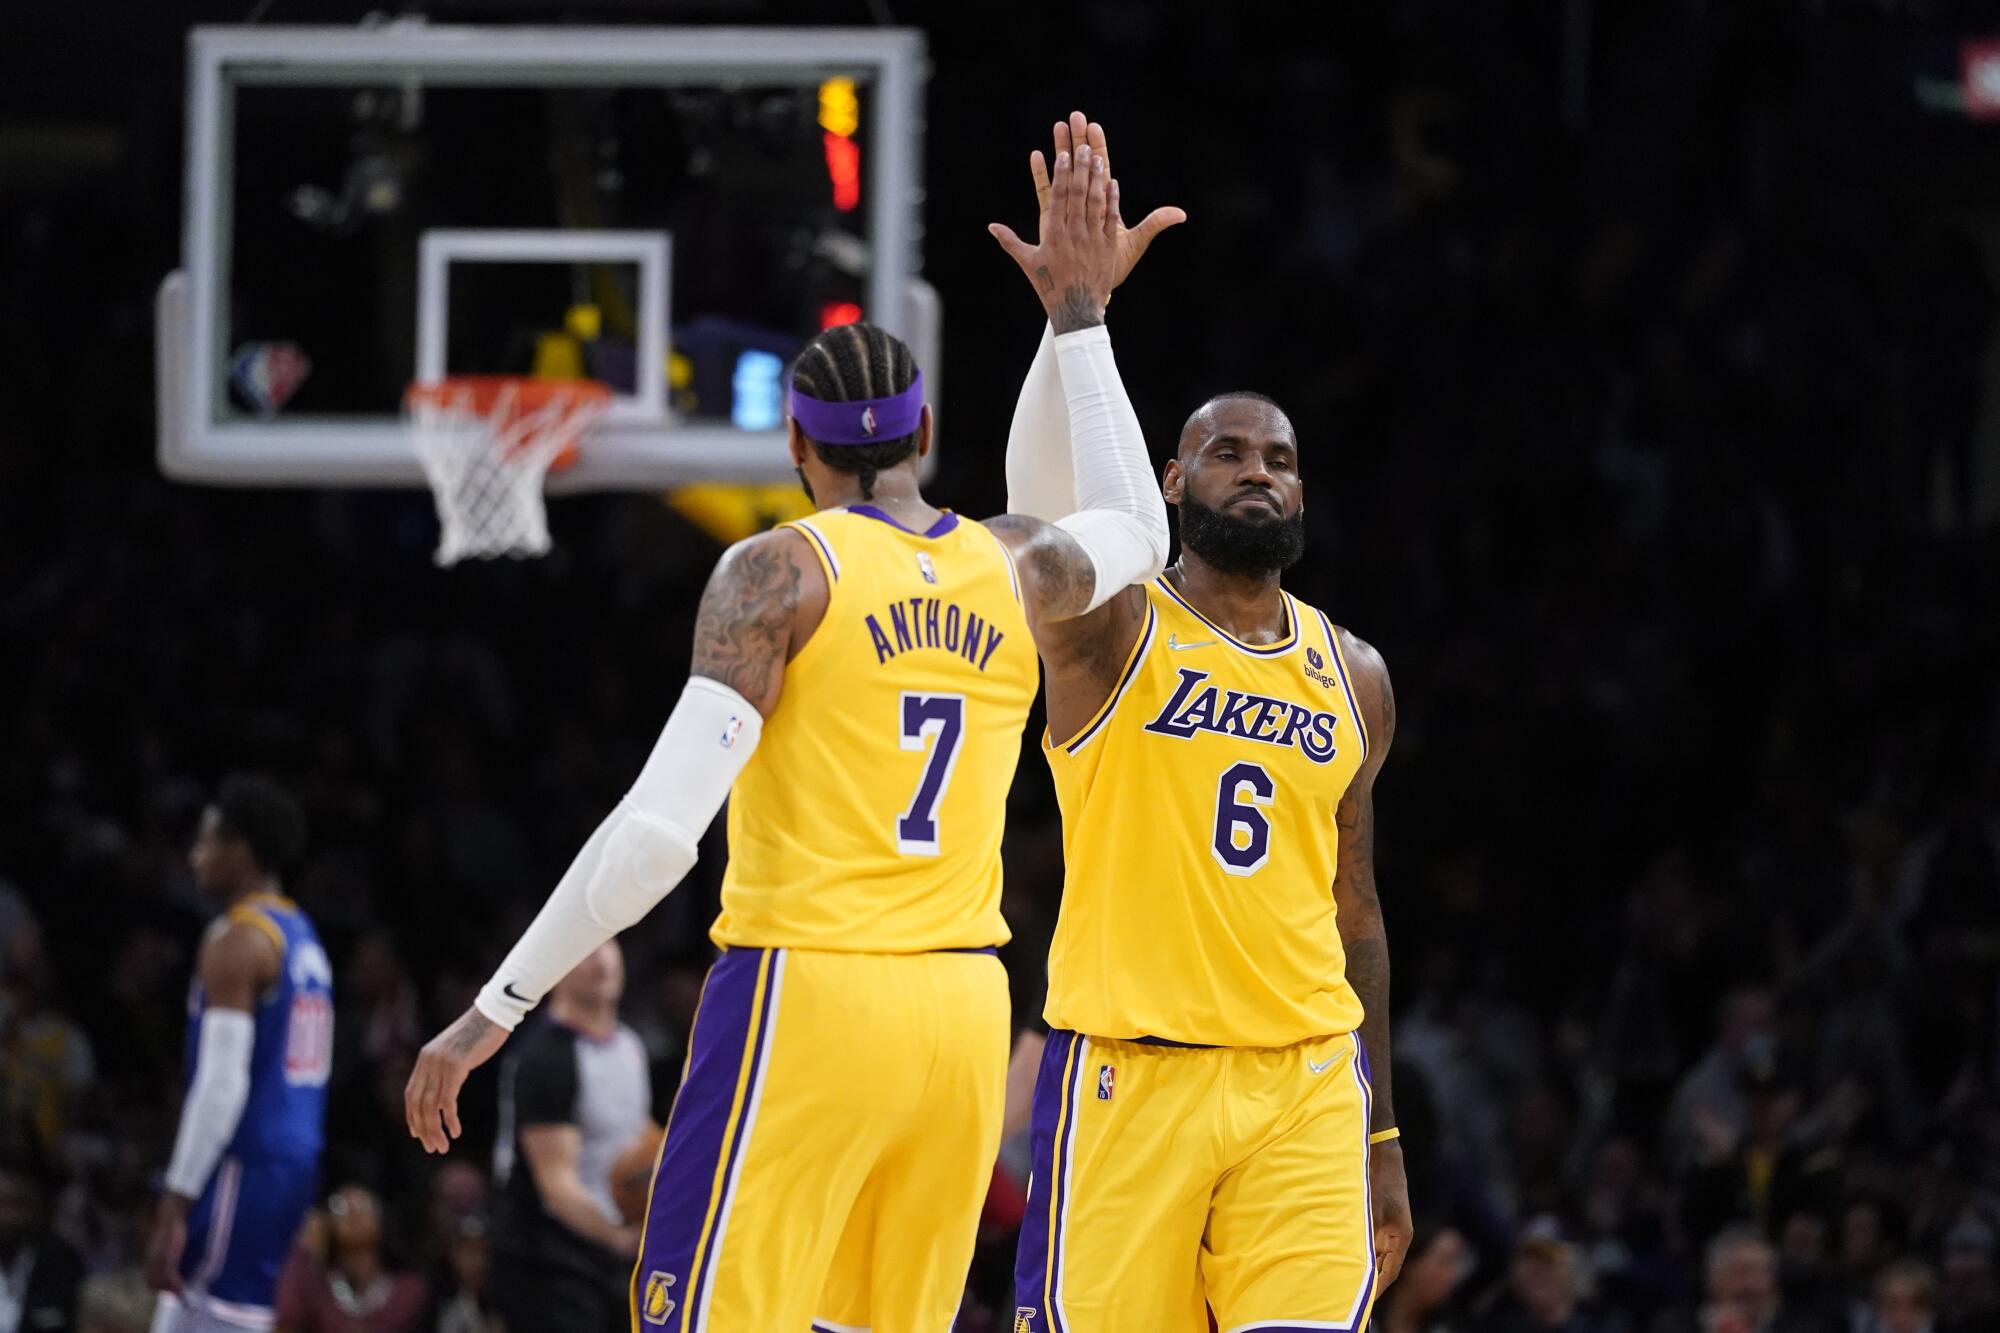 Lakers forward Carmelo Anthony, left, high-fives forward LeBron James during the second half.